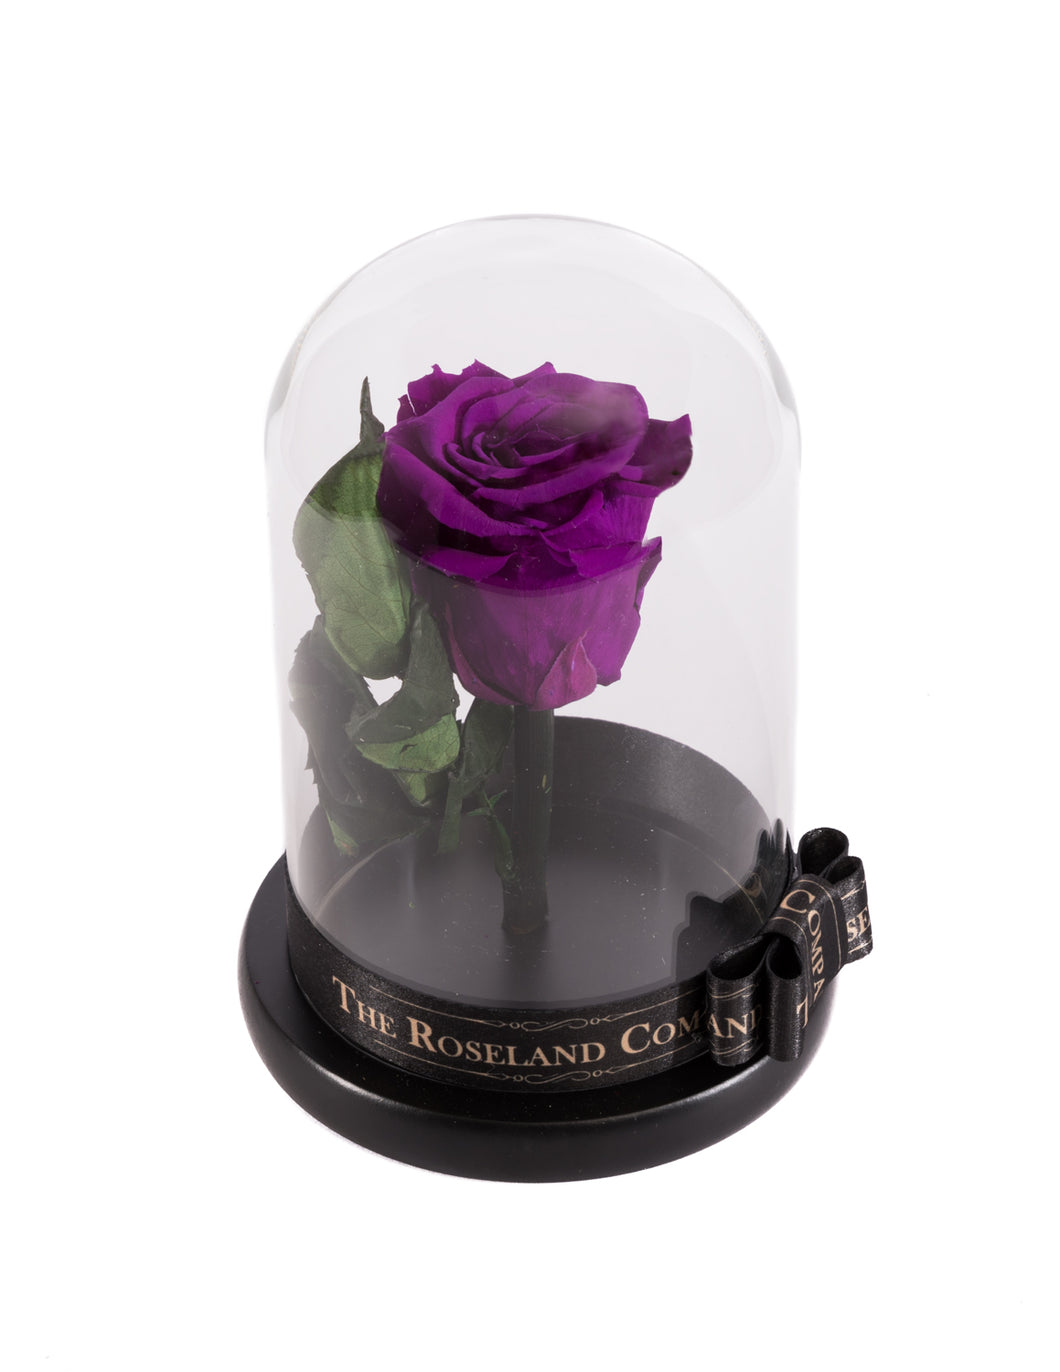 As seen in Beauty and the Beast: Purple Eternity Rose, Under the Dome